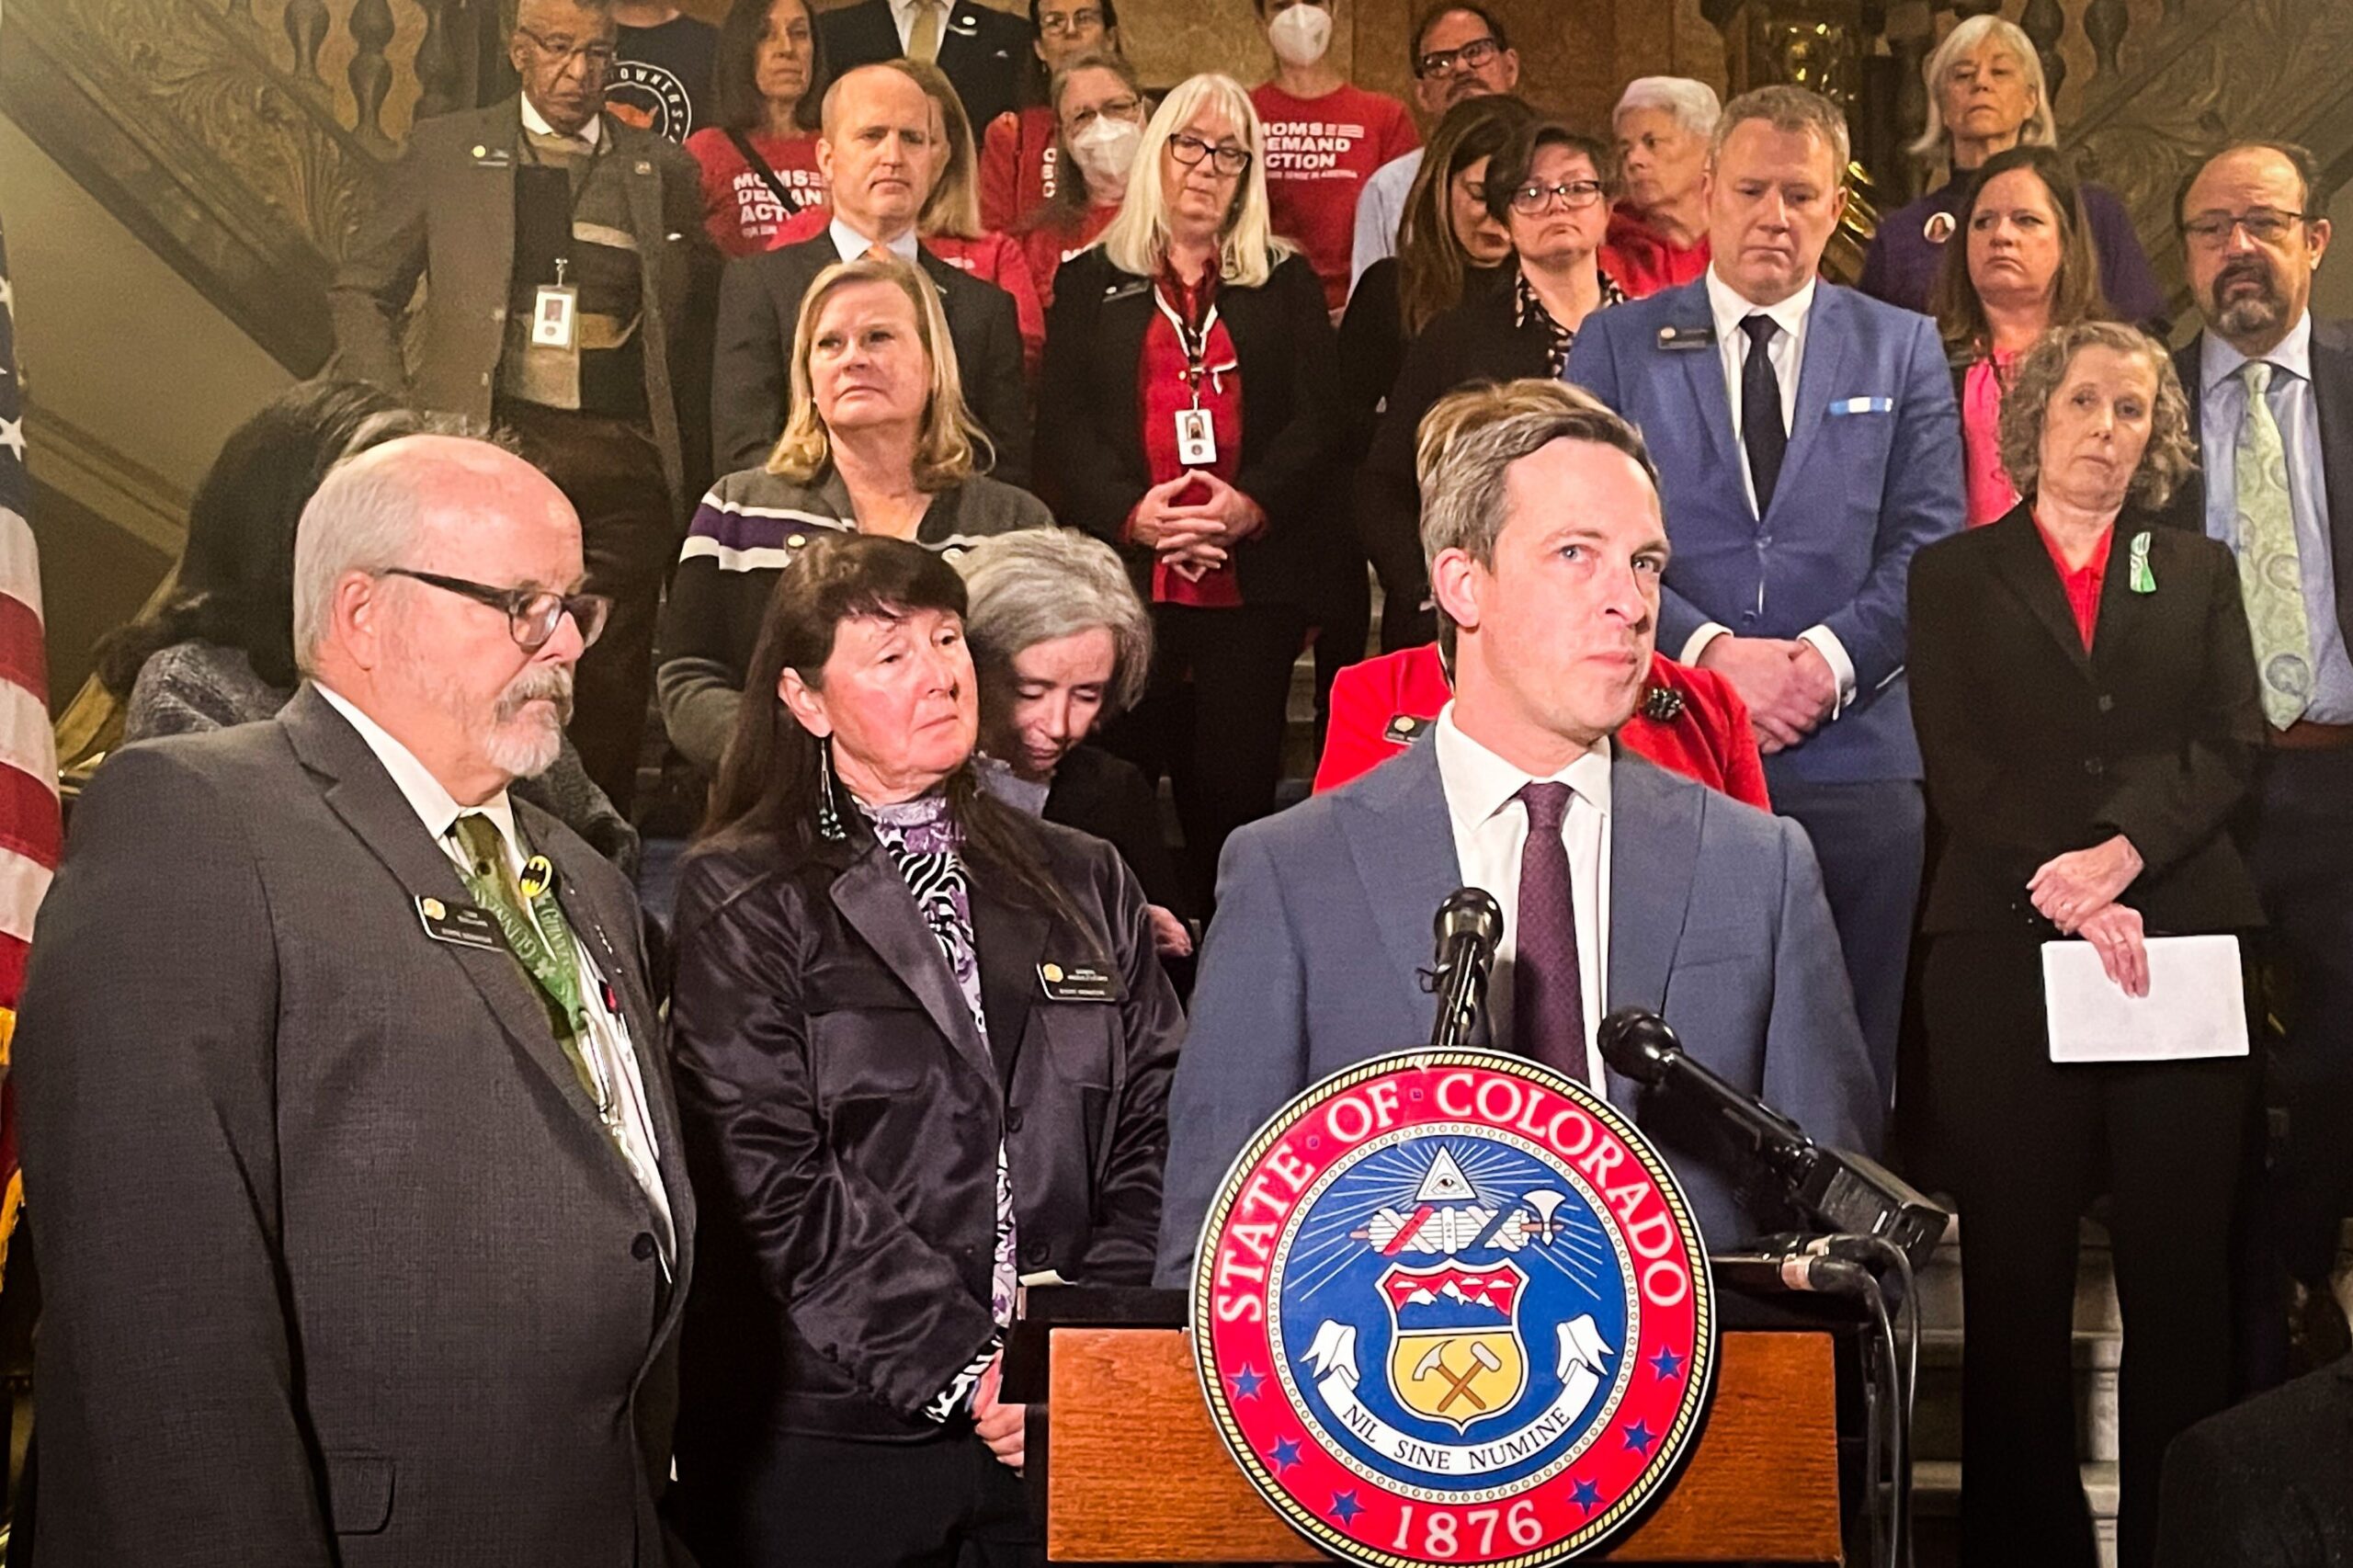 Senate President Steve Fenberg speaking at the Colorado Capitol during a news conference unveiling a package of gun bills from Democrats on Thursday, Feb. 23, 2023.